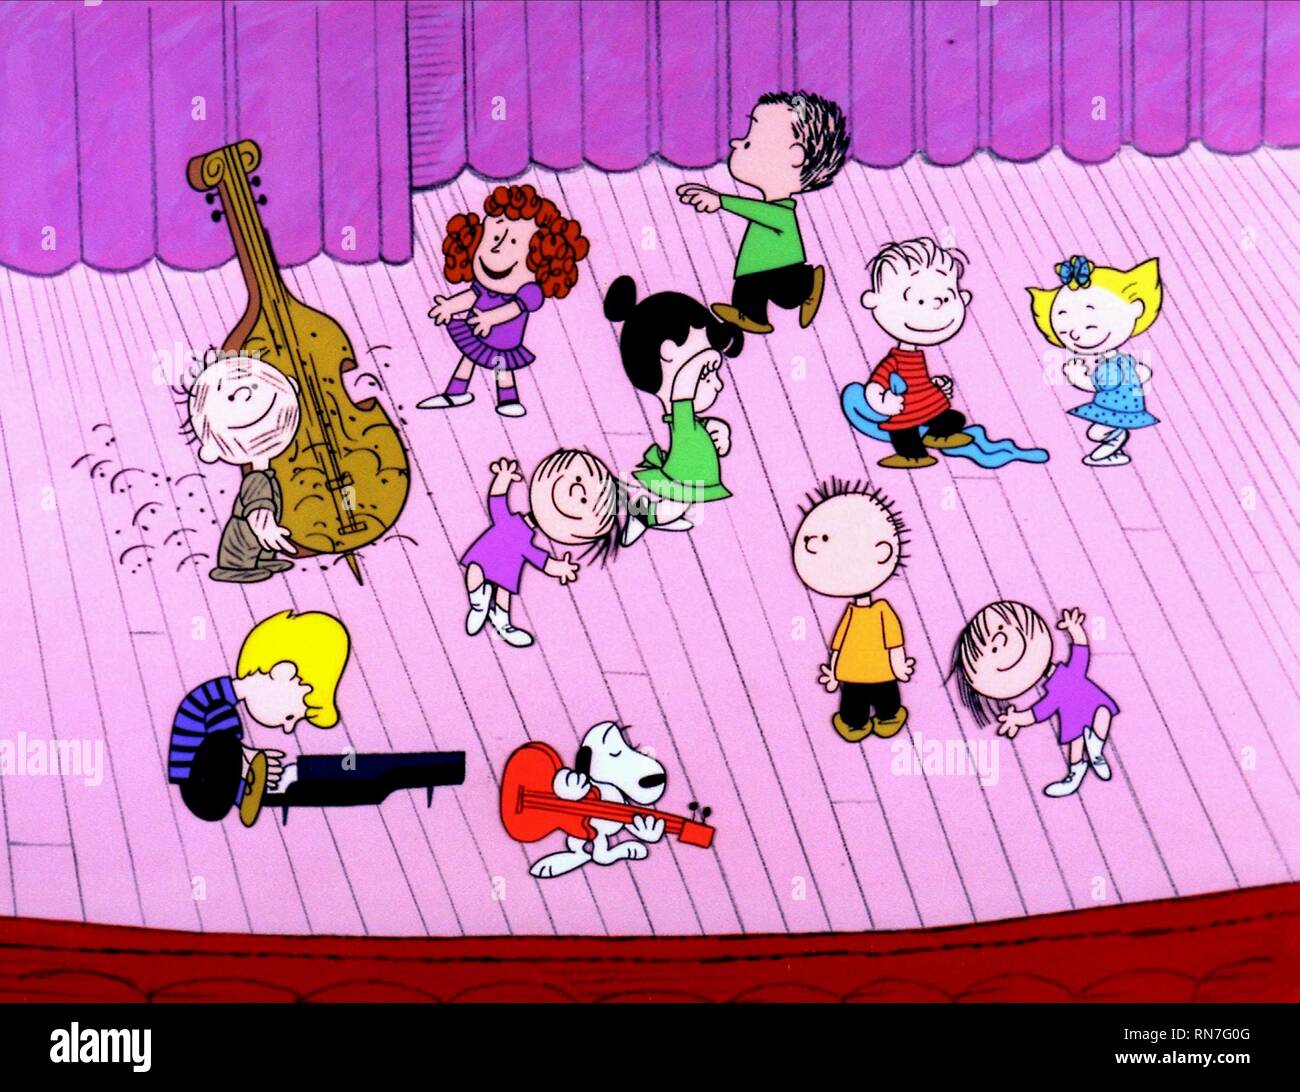 SCHROEDER,LINUS,SNOOPY,LUCY, A CHARLIE BROWN CHRISTMAS, 1965 Stock Photo